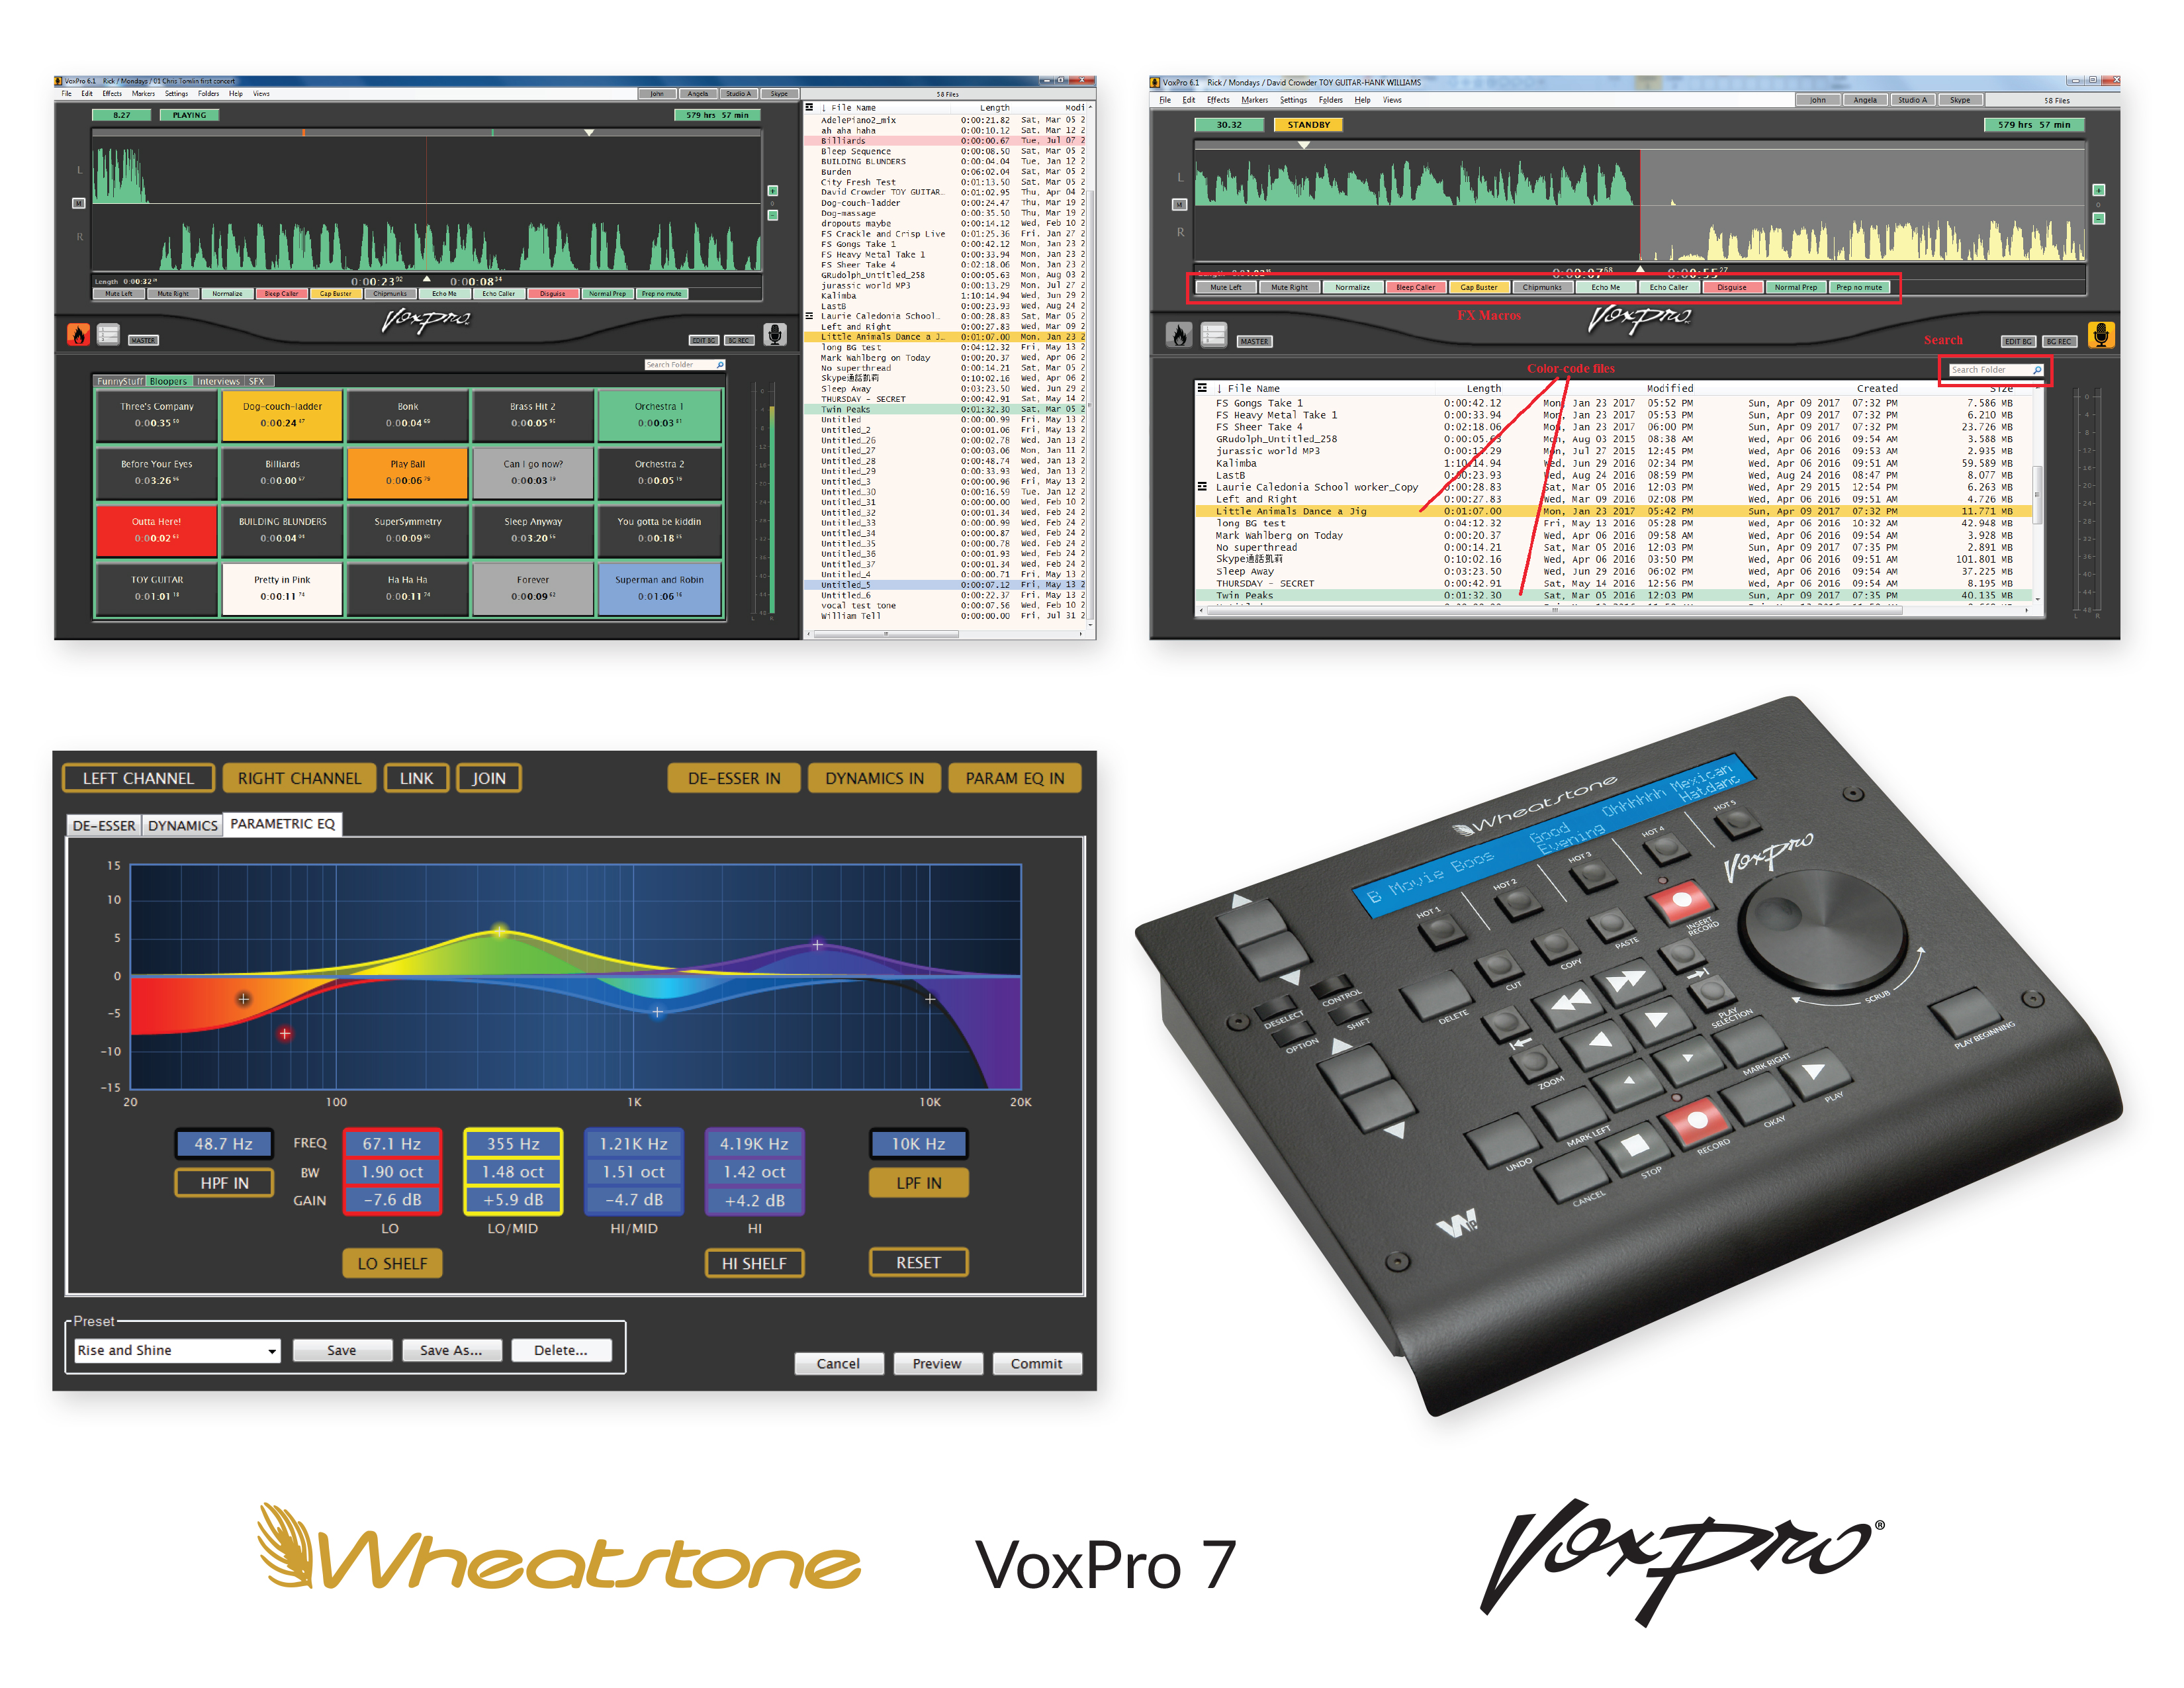 WHEATSTONE, RADIO AIR-PERSONALITY DEBUT NEW VOXPRO 7 AT NAB 2017